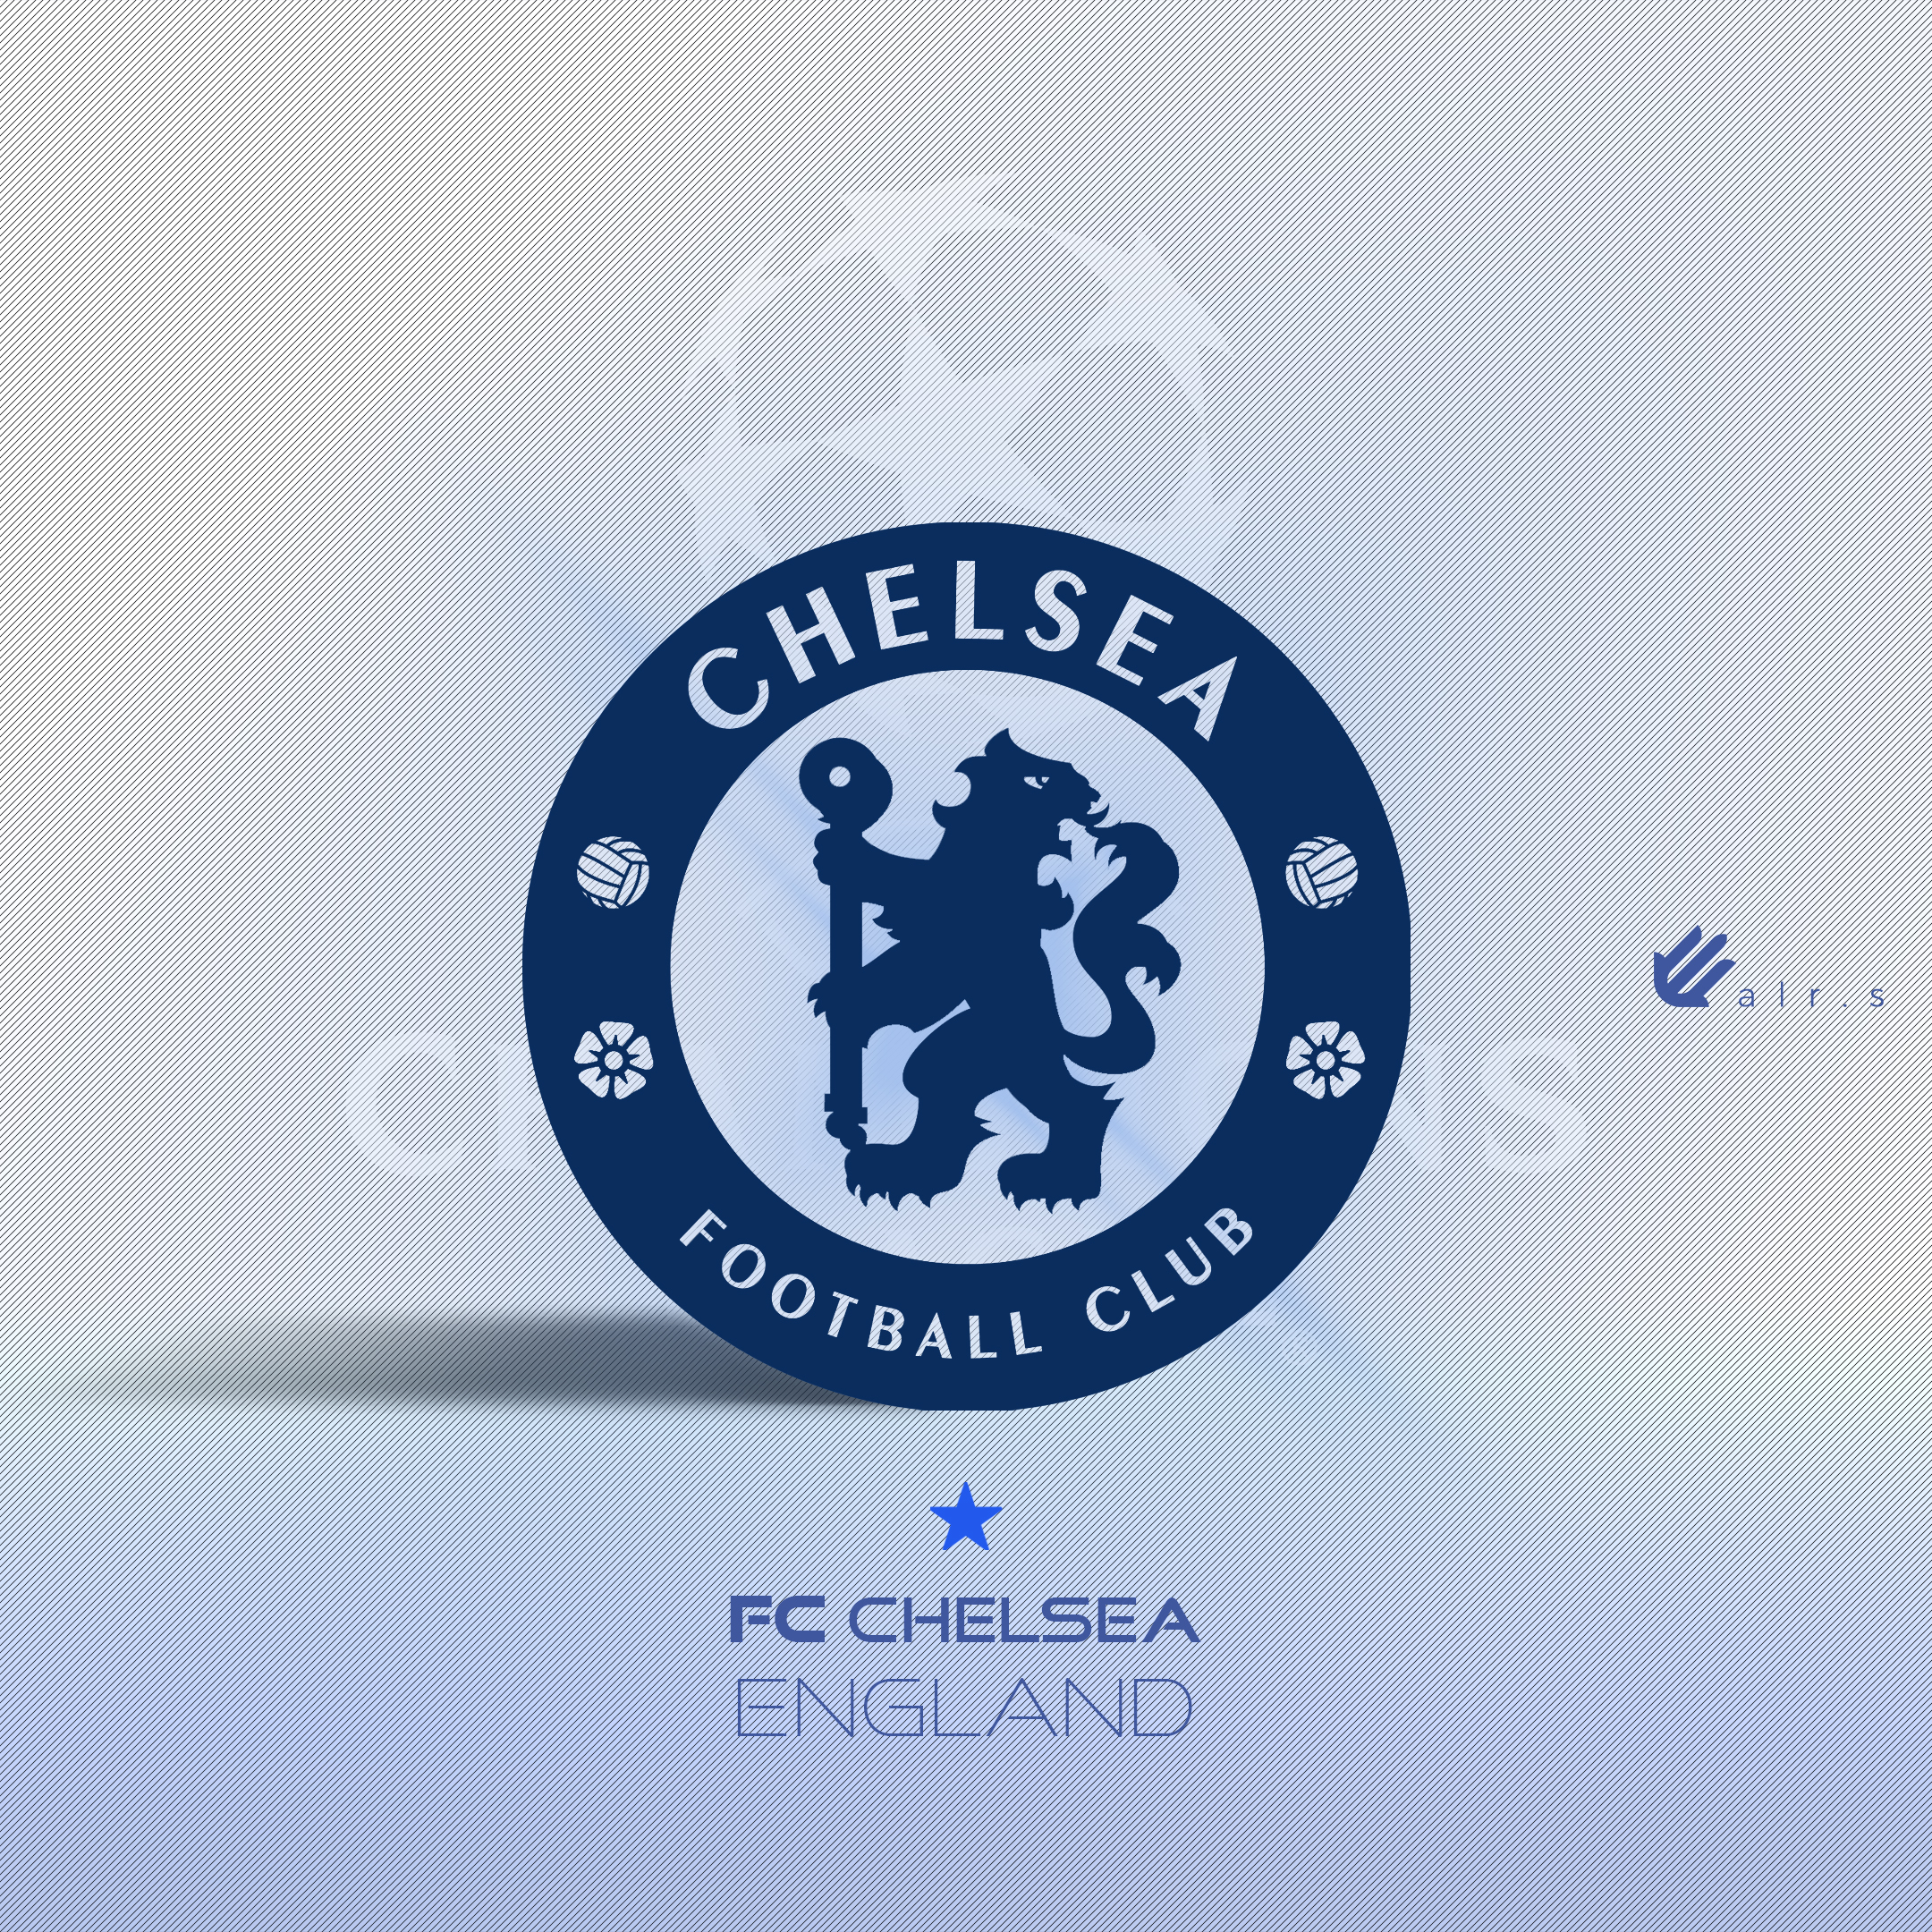 Football Chelsea Logo Champions League Clubs Graphic Design Creativity Photography Colorful Soccer S 2160x2160